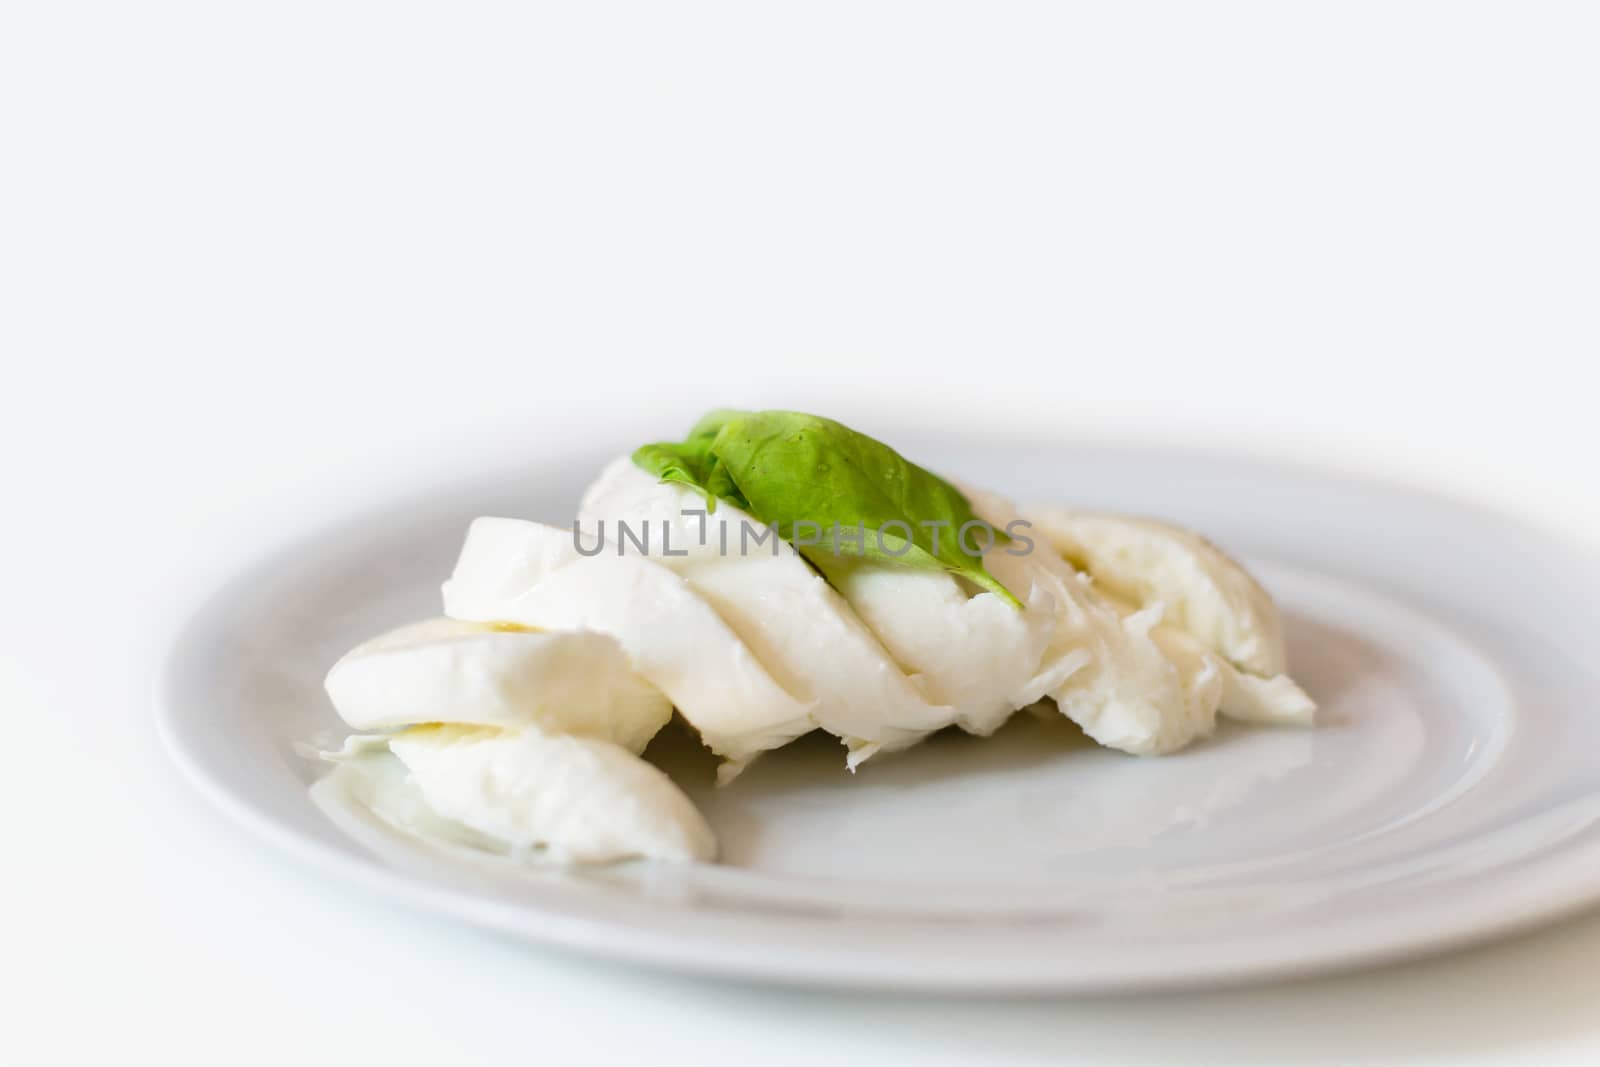 Slices of italian mozzarella with leaves of basil by enrico.lapponi